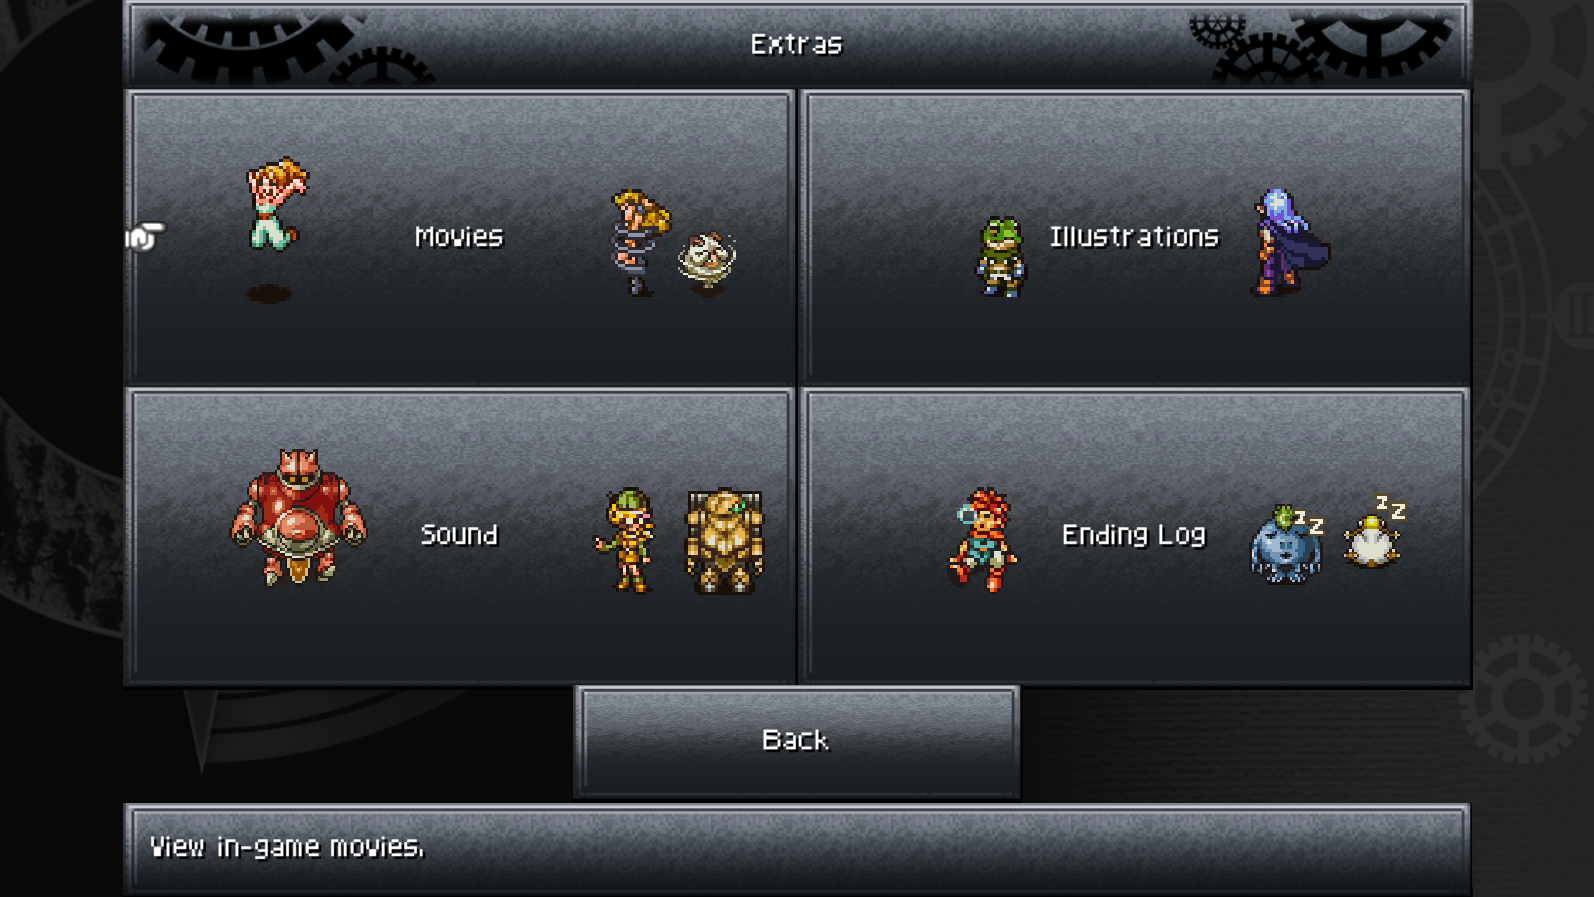 The newly added extras menu from Chrono Trigger for PC.